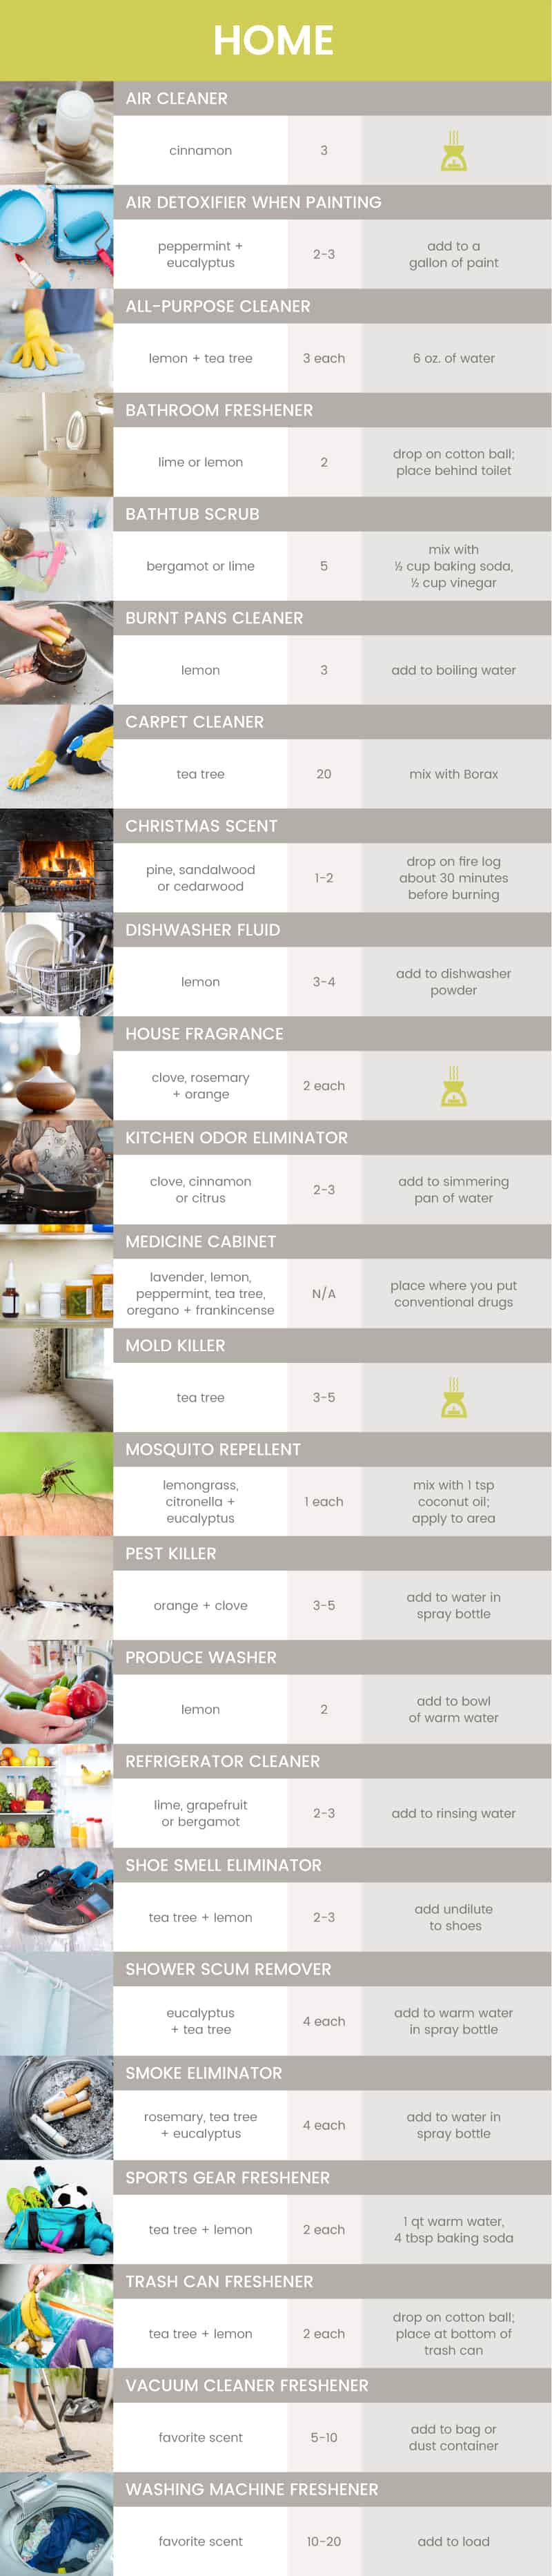 Uses of essential oils for home - Dr. Axe